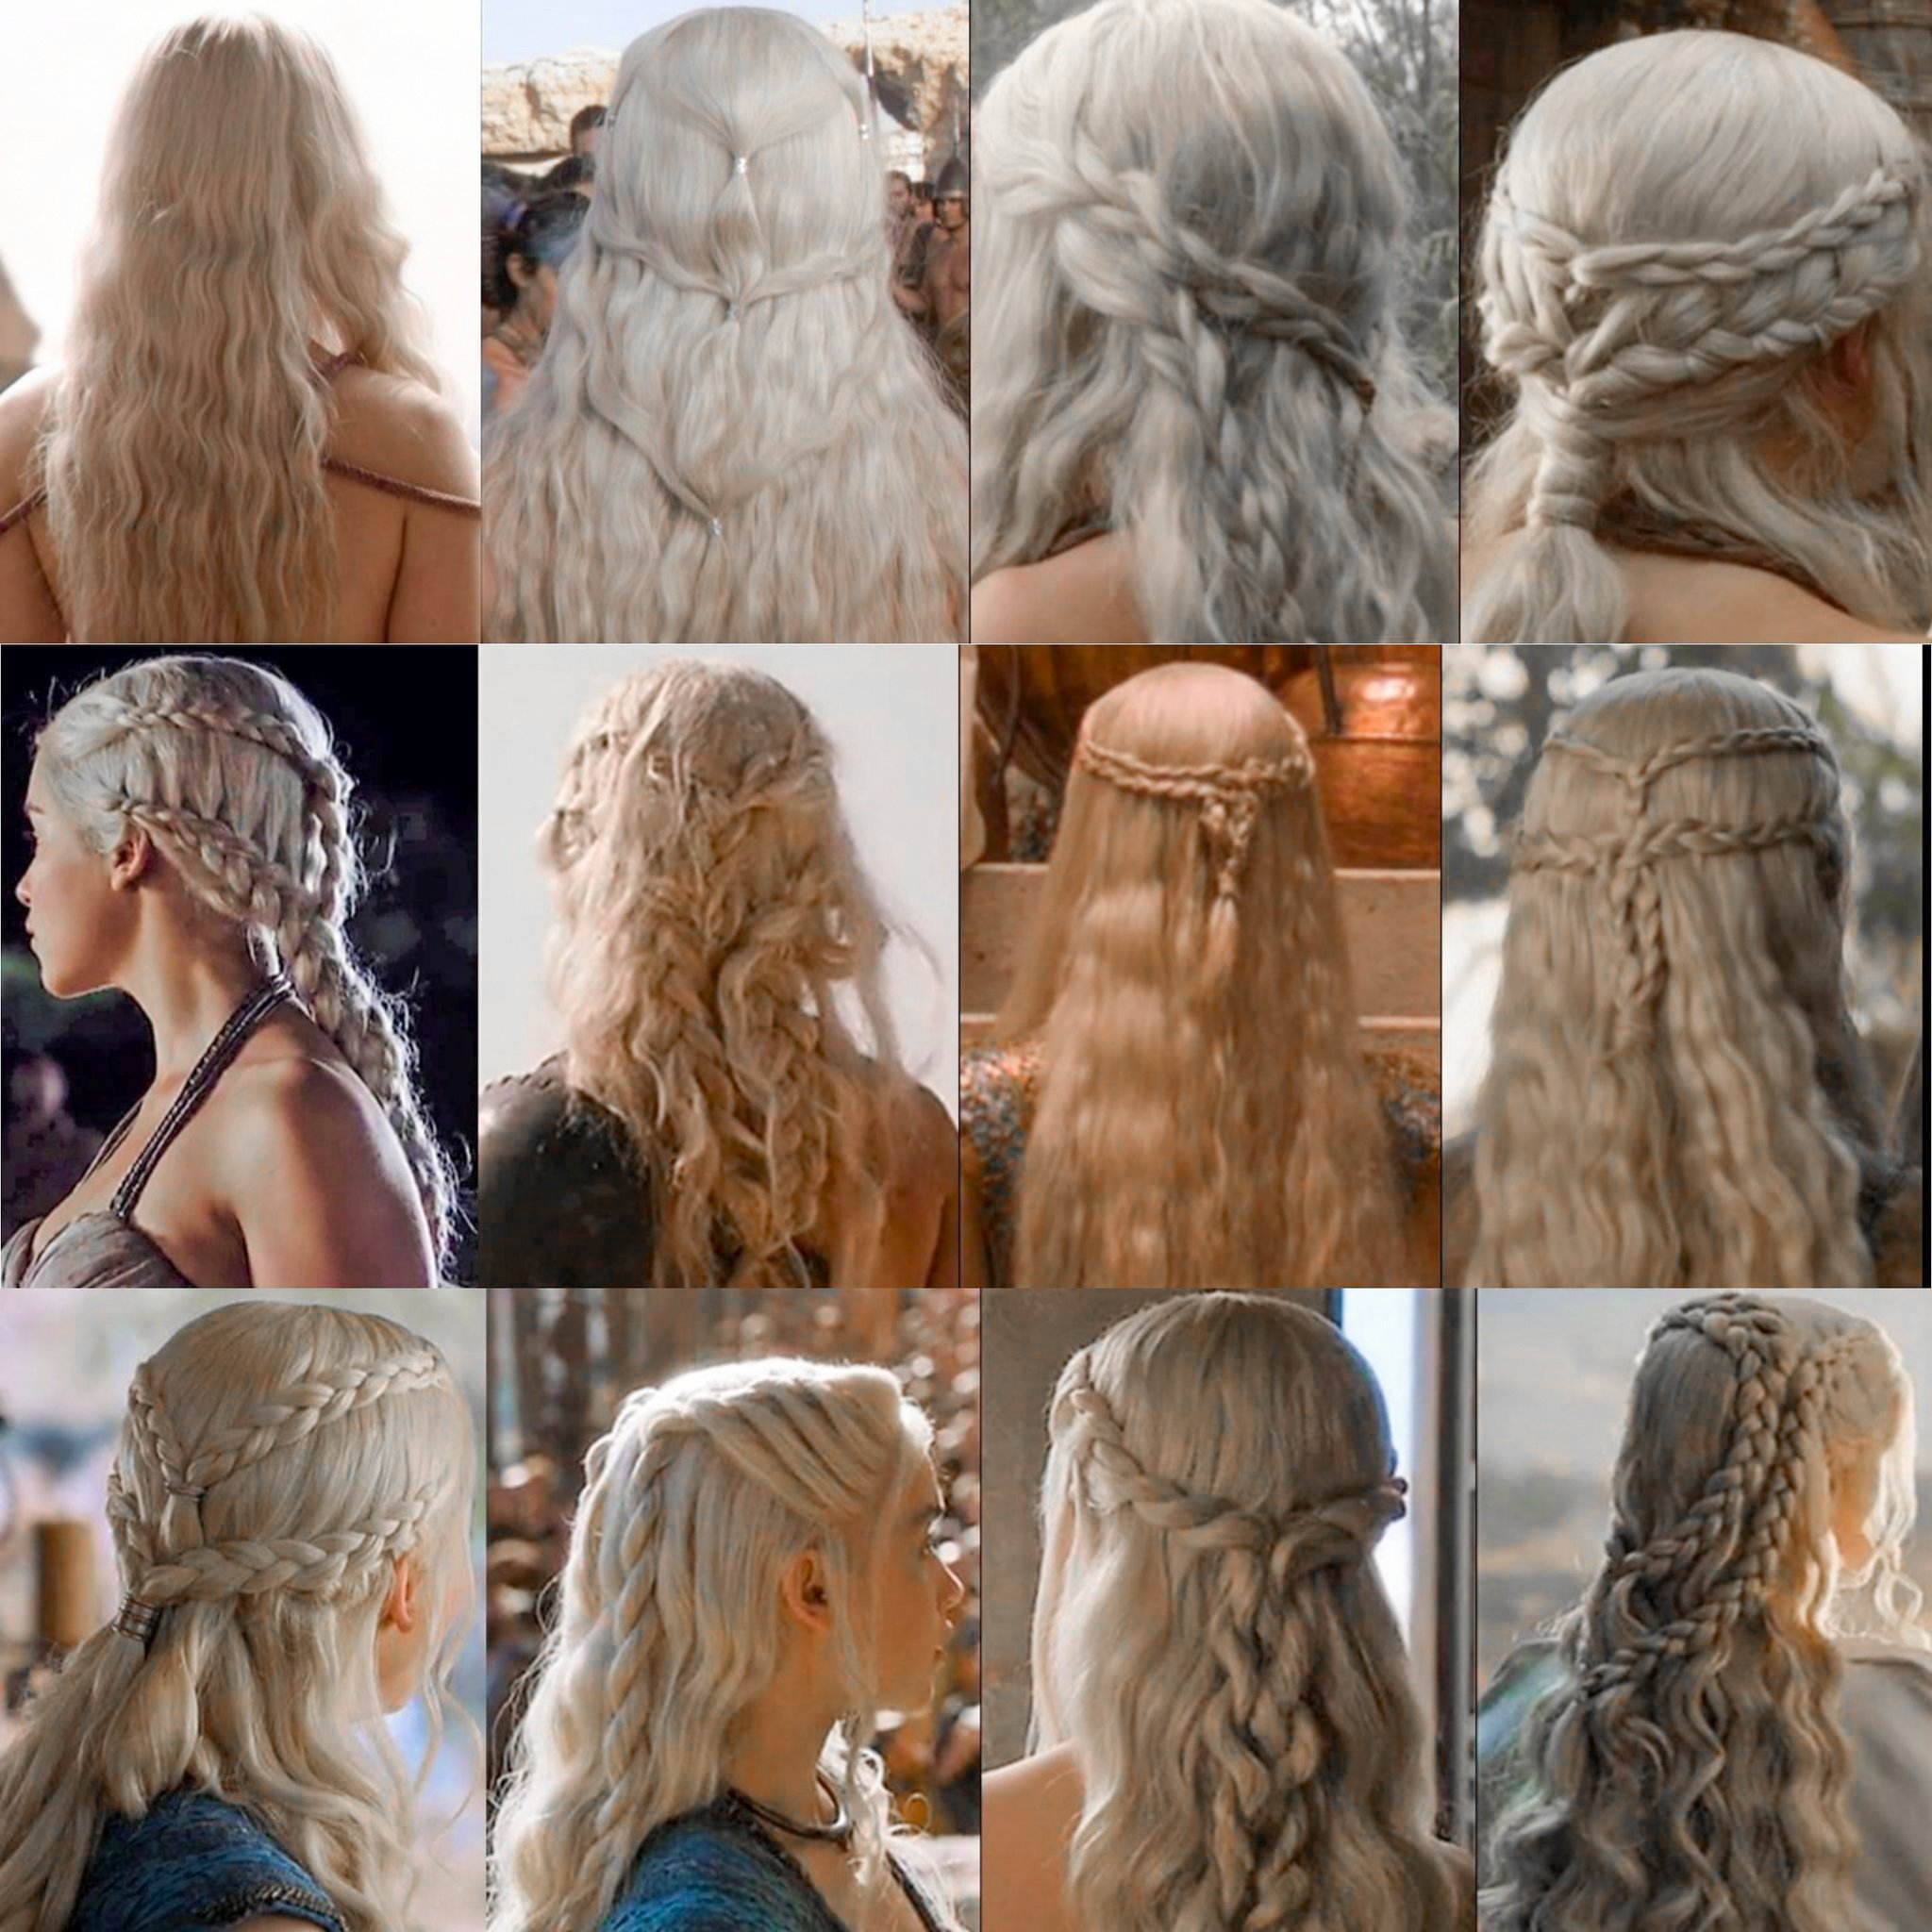 What's The Meaning Behind Daenerys' Hairstyle Changes In 'Game Of Thrones'  - Cultura Colectiva